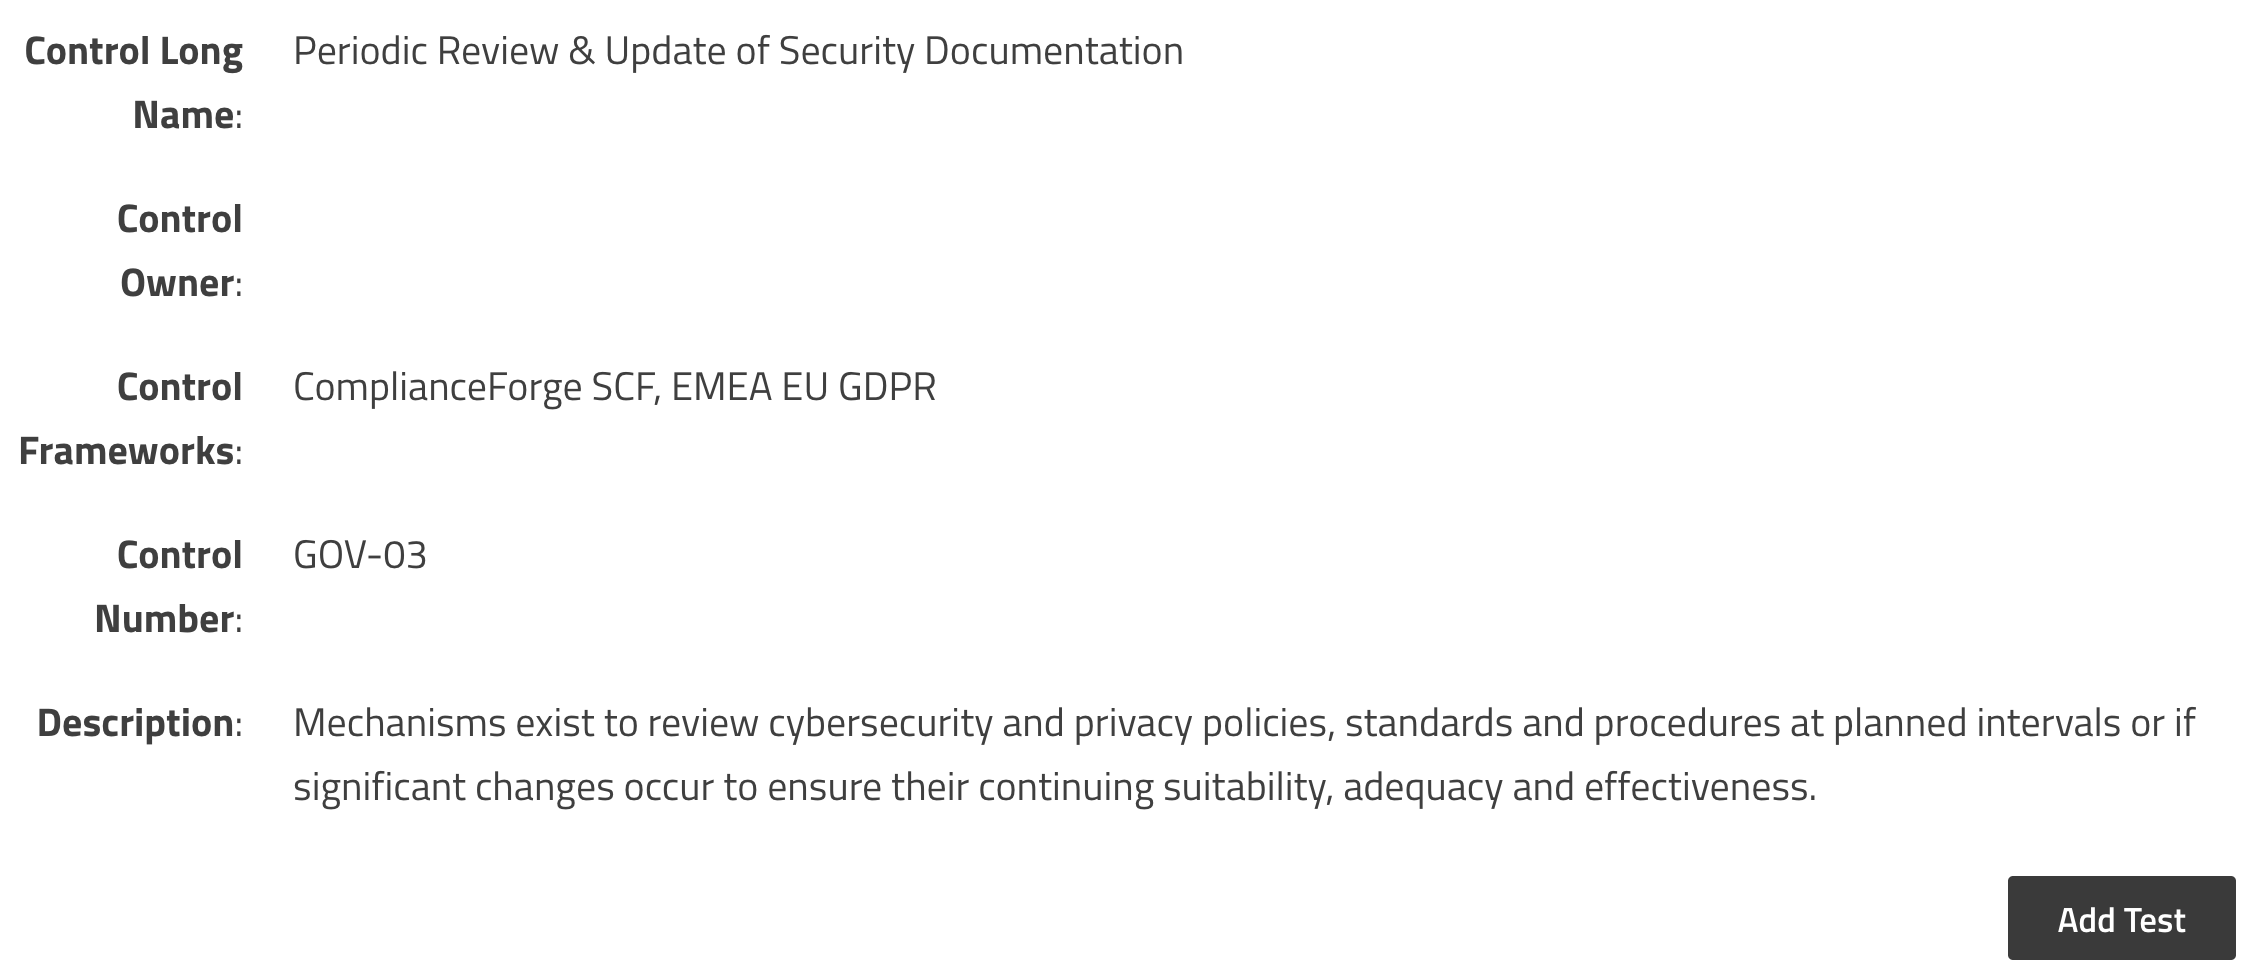 Periodic Review & Update of Security Documentation